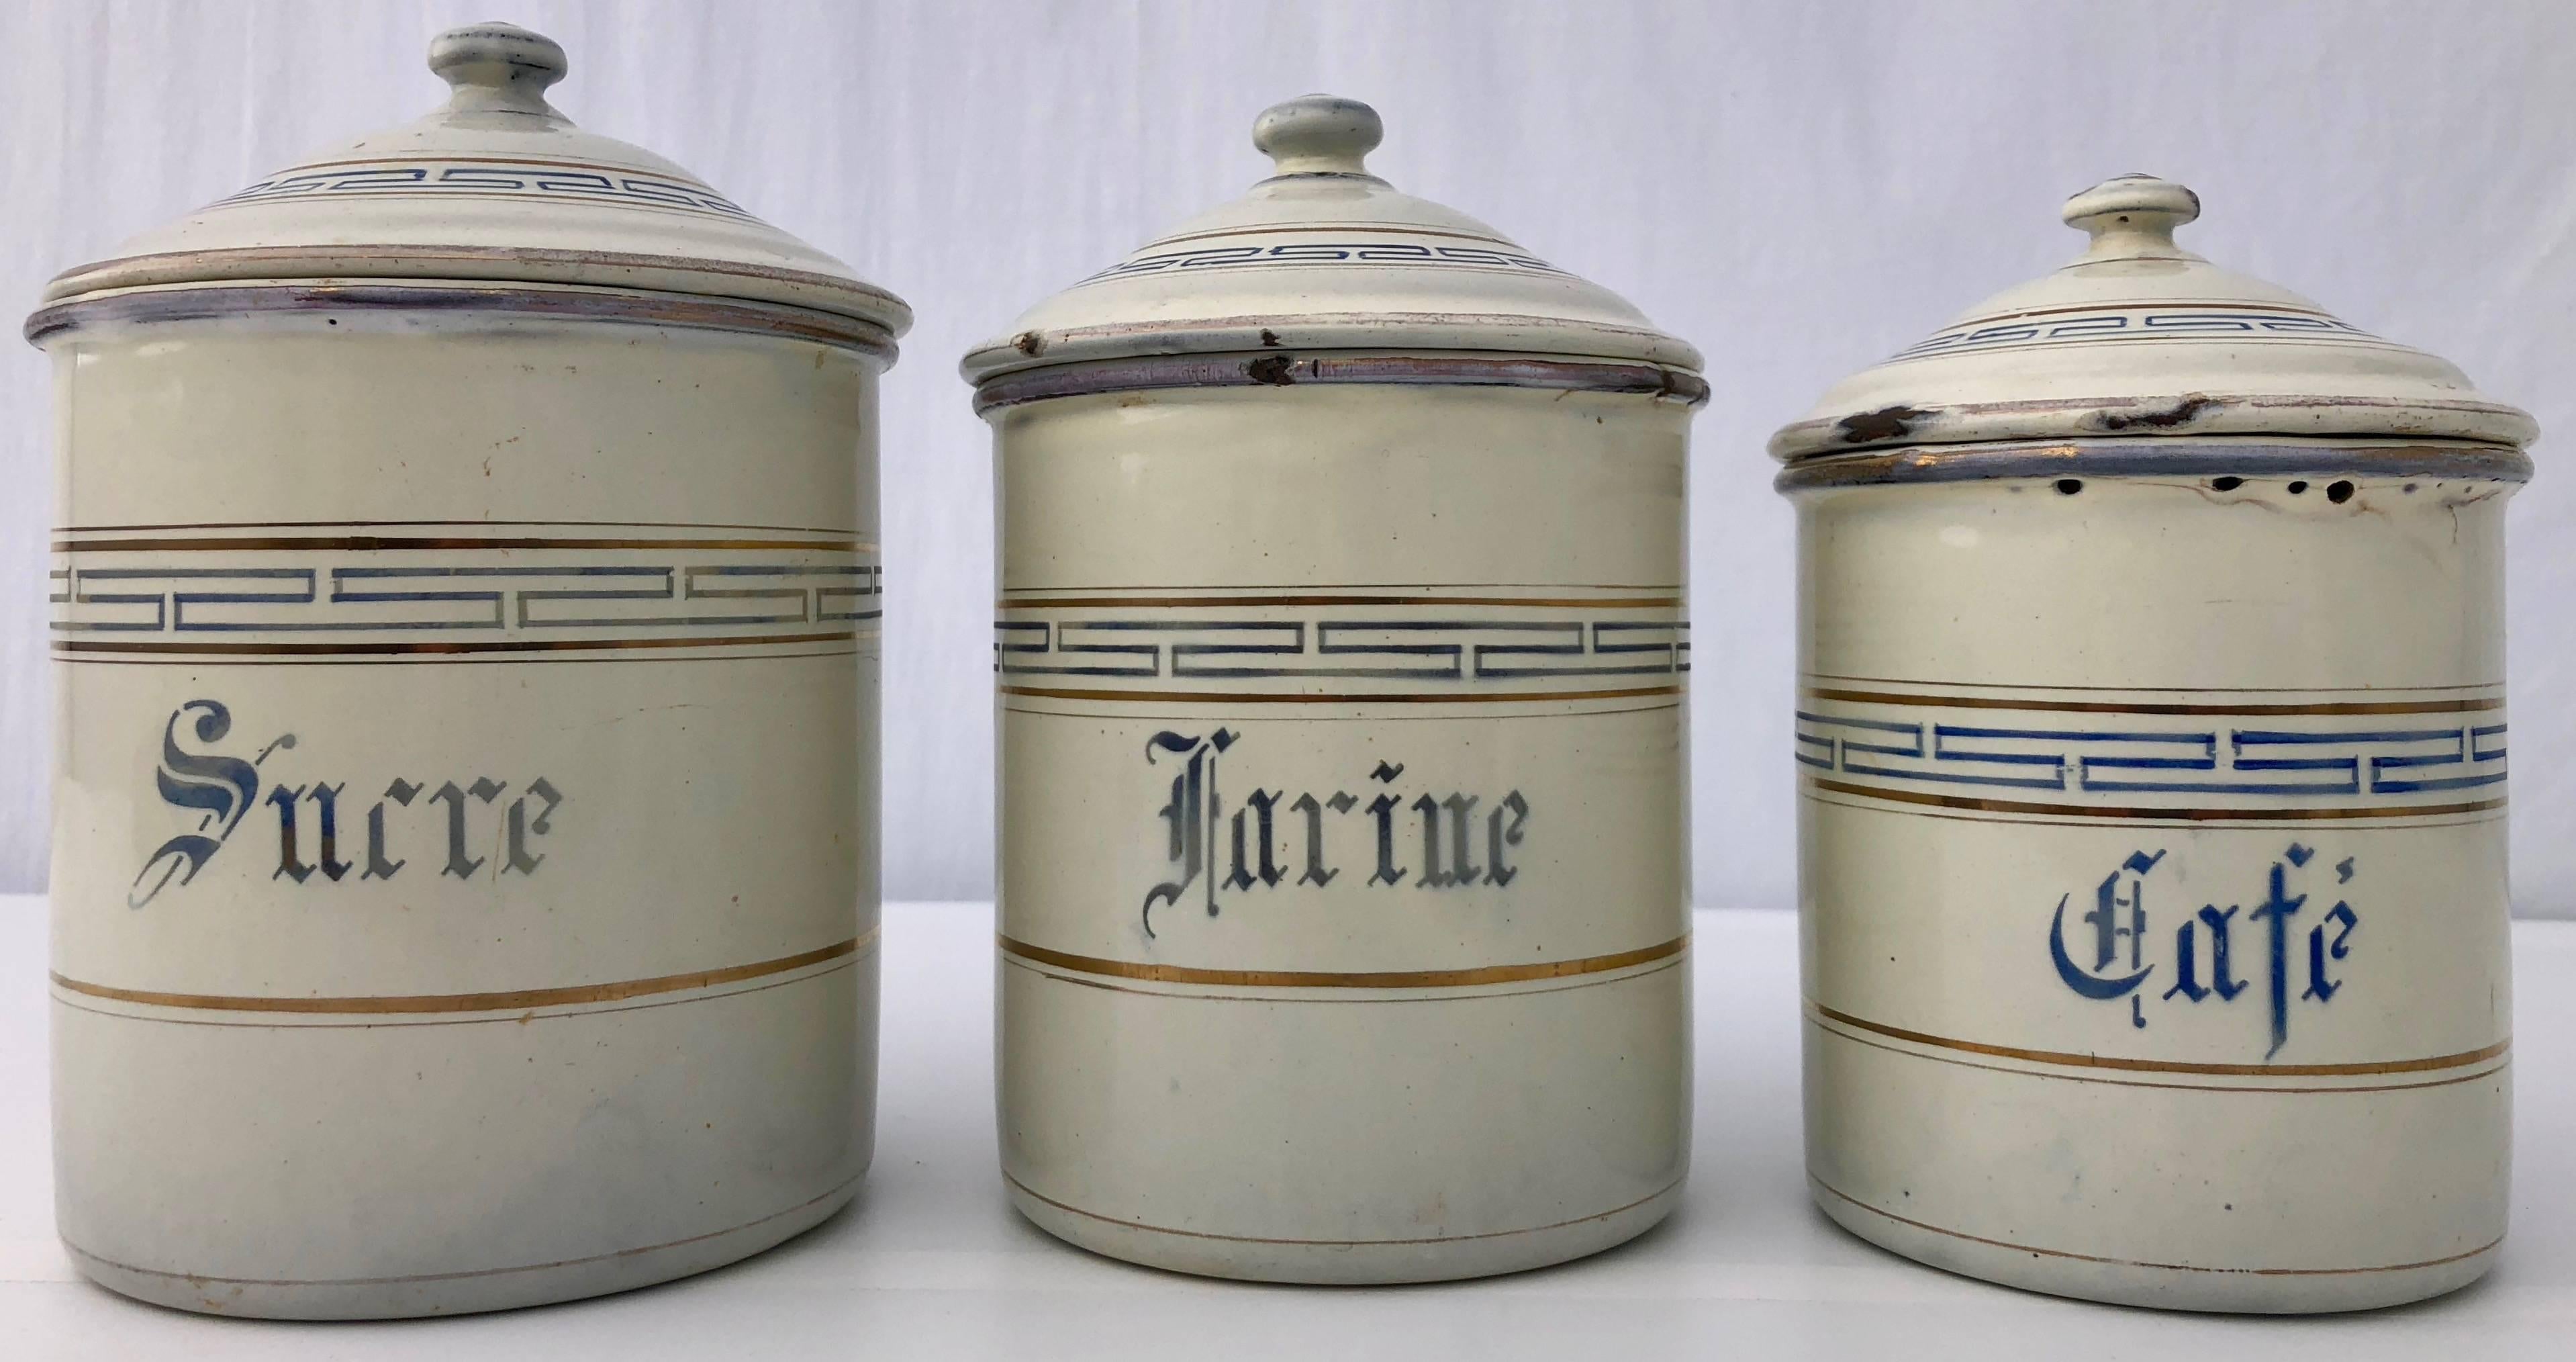 This French enamelware canister set includes six graduating sizes of jars with their matching lids. They are in a beautiful off white color with blue and gold trim and blue French lettering indicating their original use. The jars nest in each other